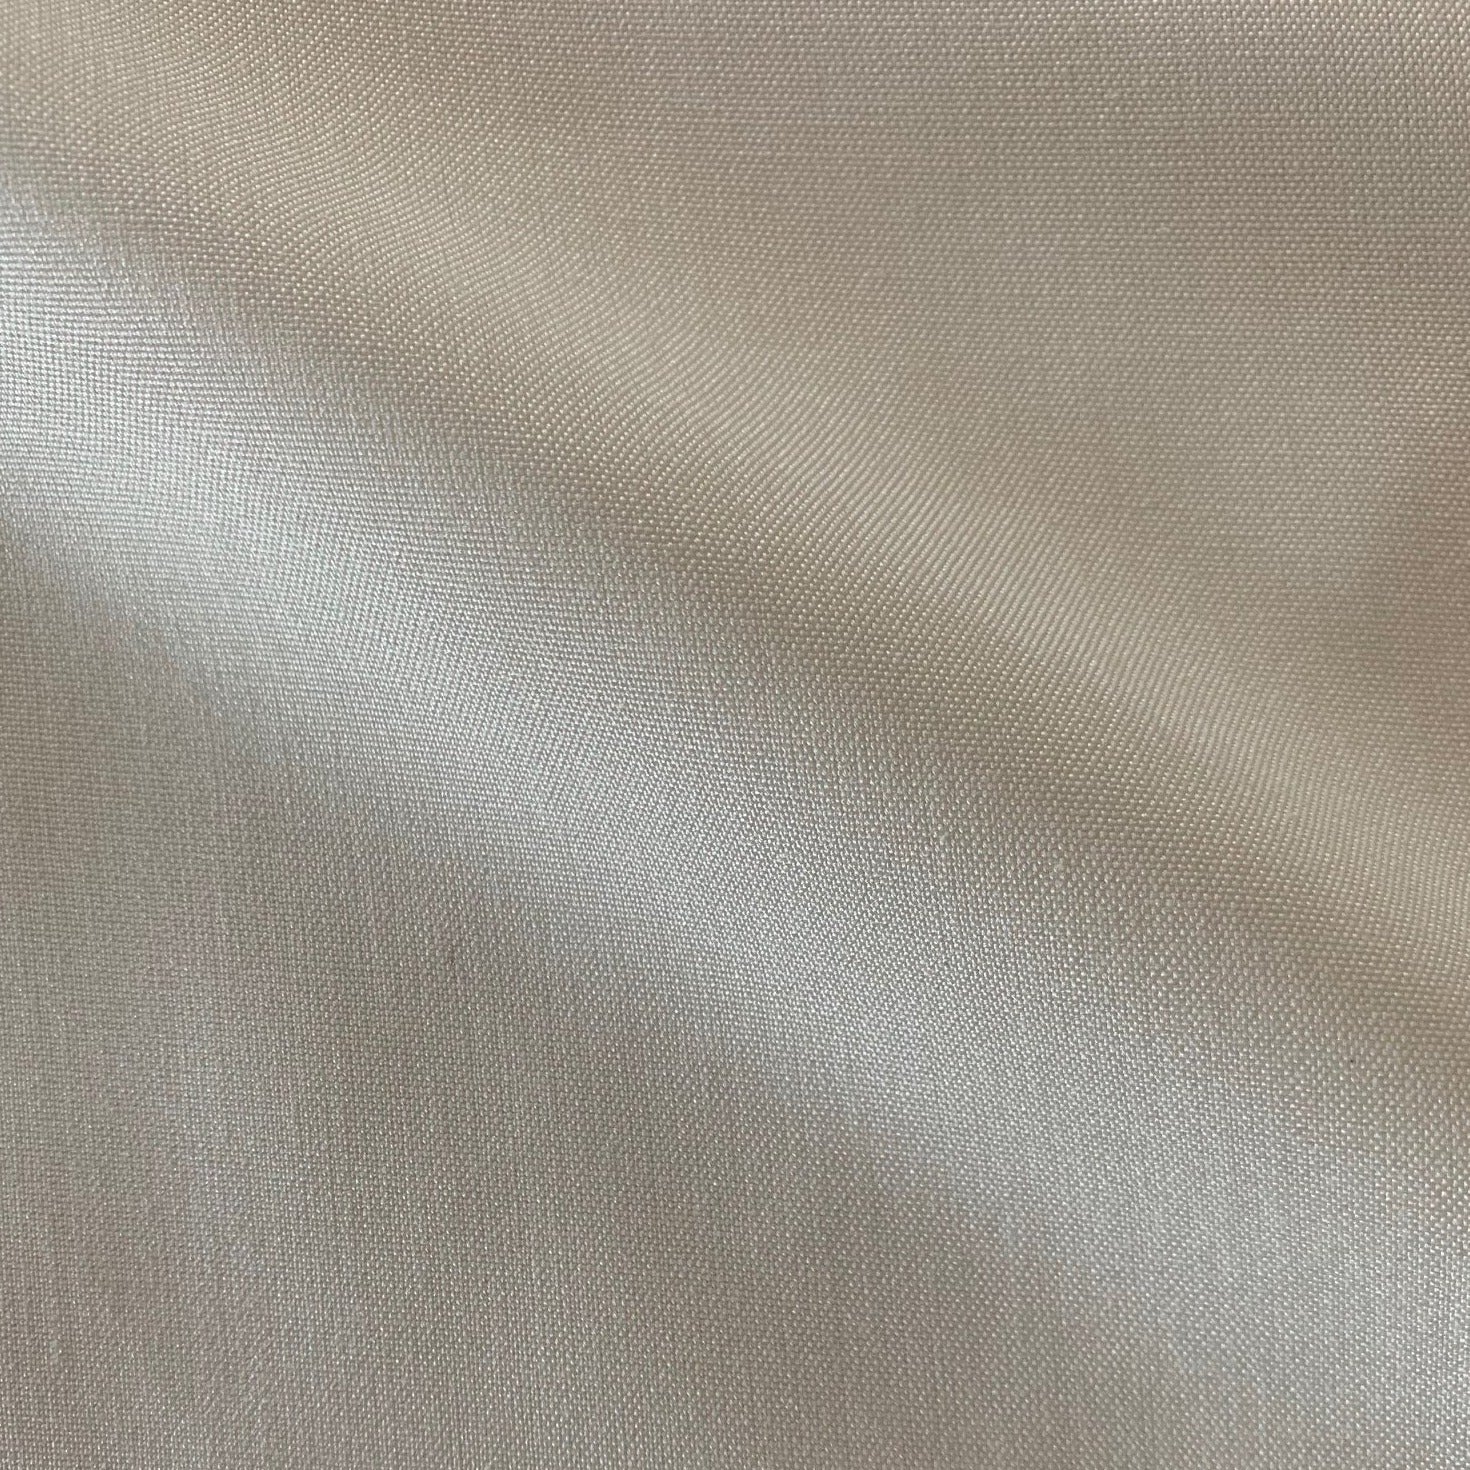 Showing double fuji a natural colored silk fabric with breathable light weight pure spun silk shirting in closeup